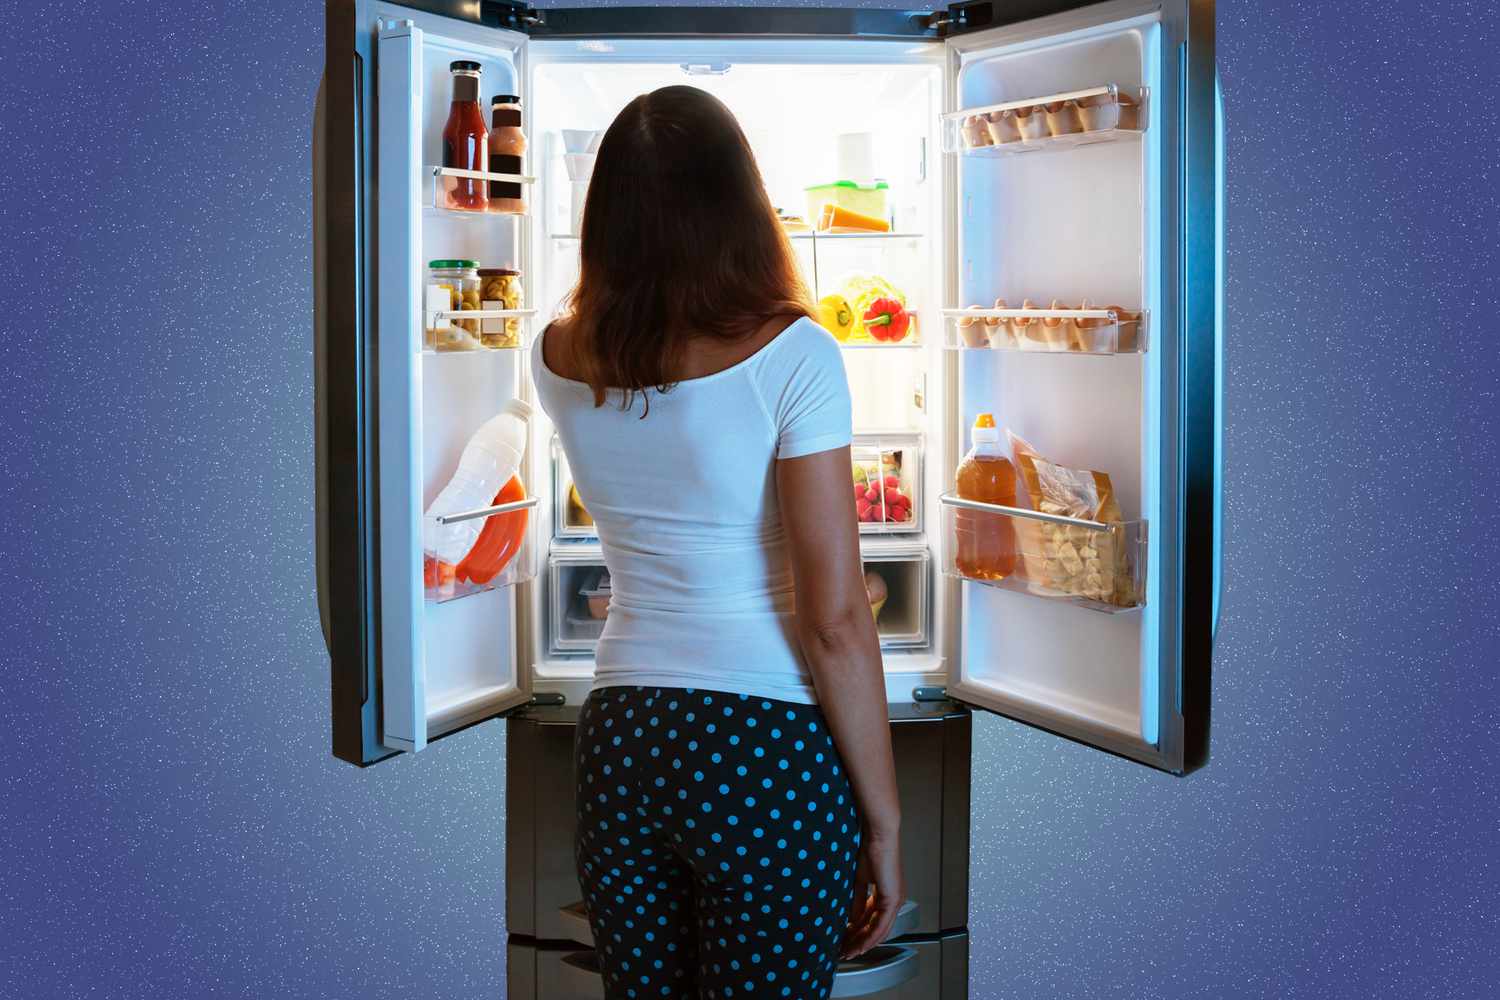 A woman looking in a fridge at night on a designed background